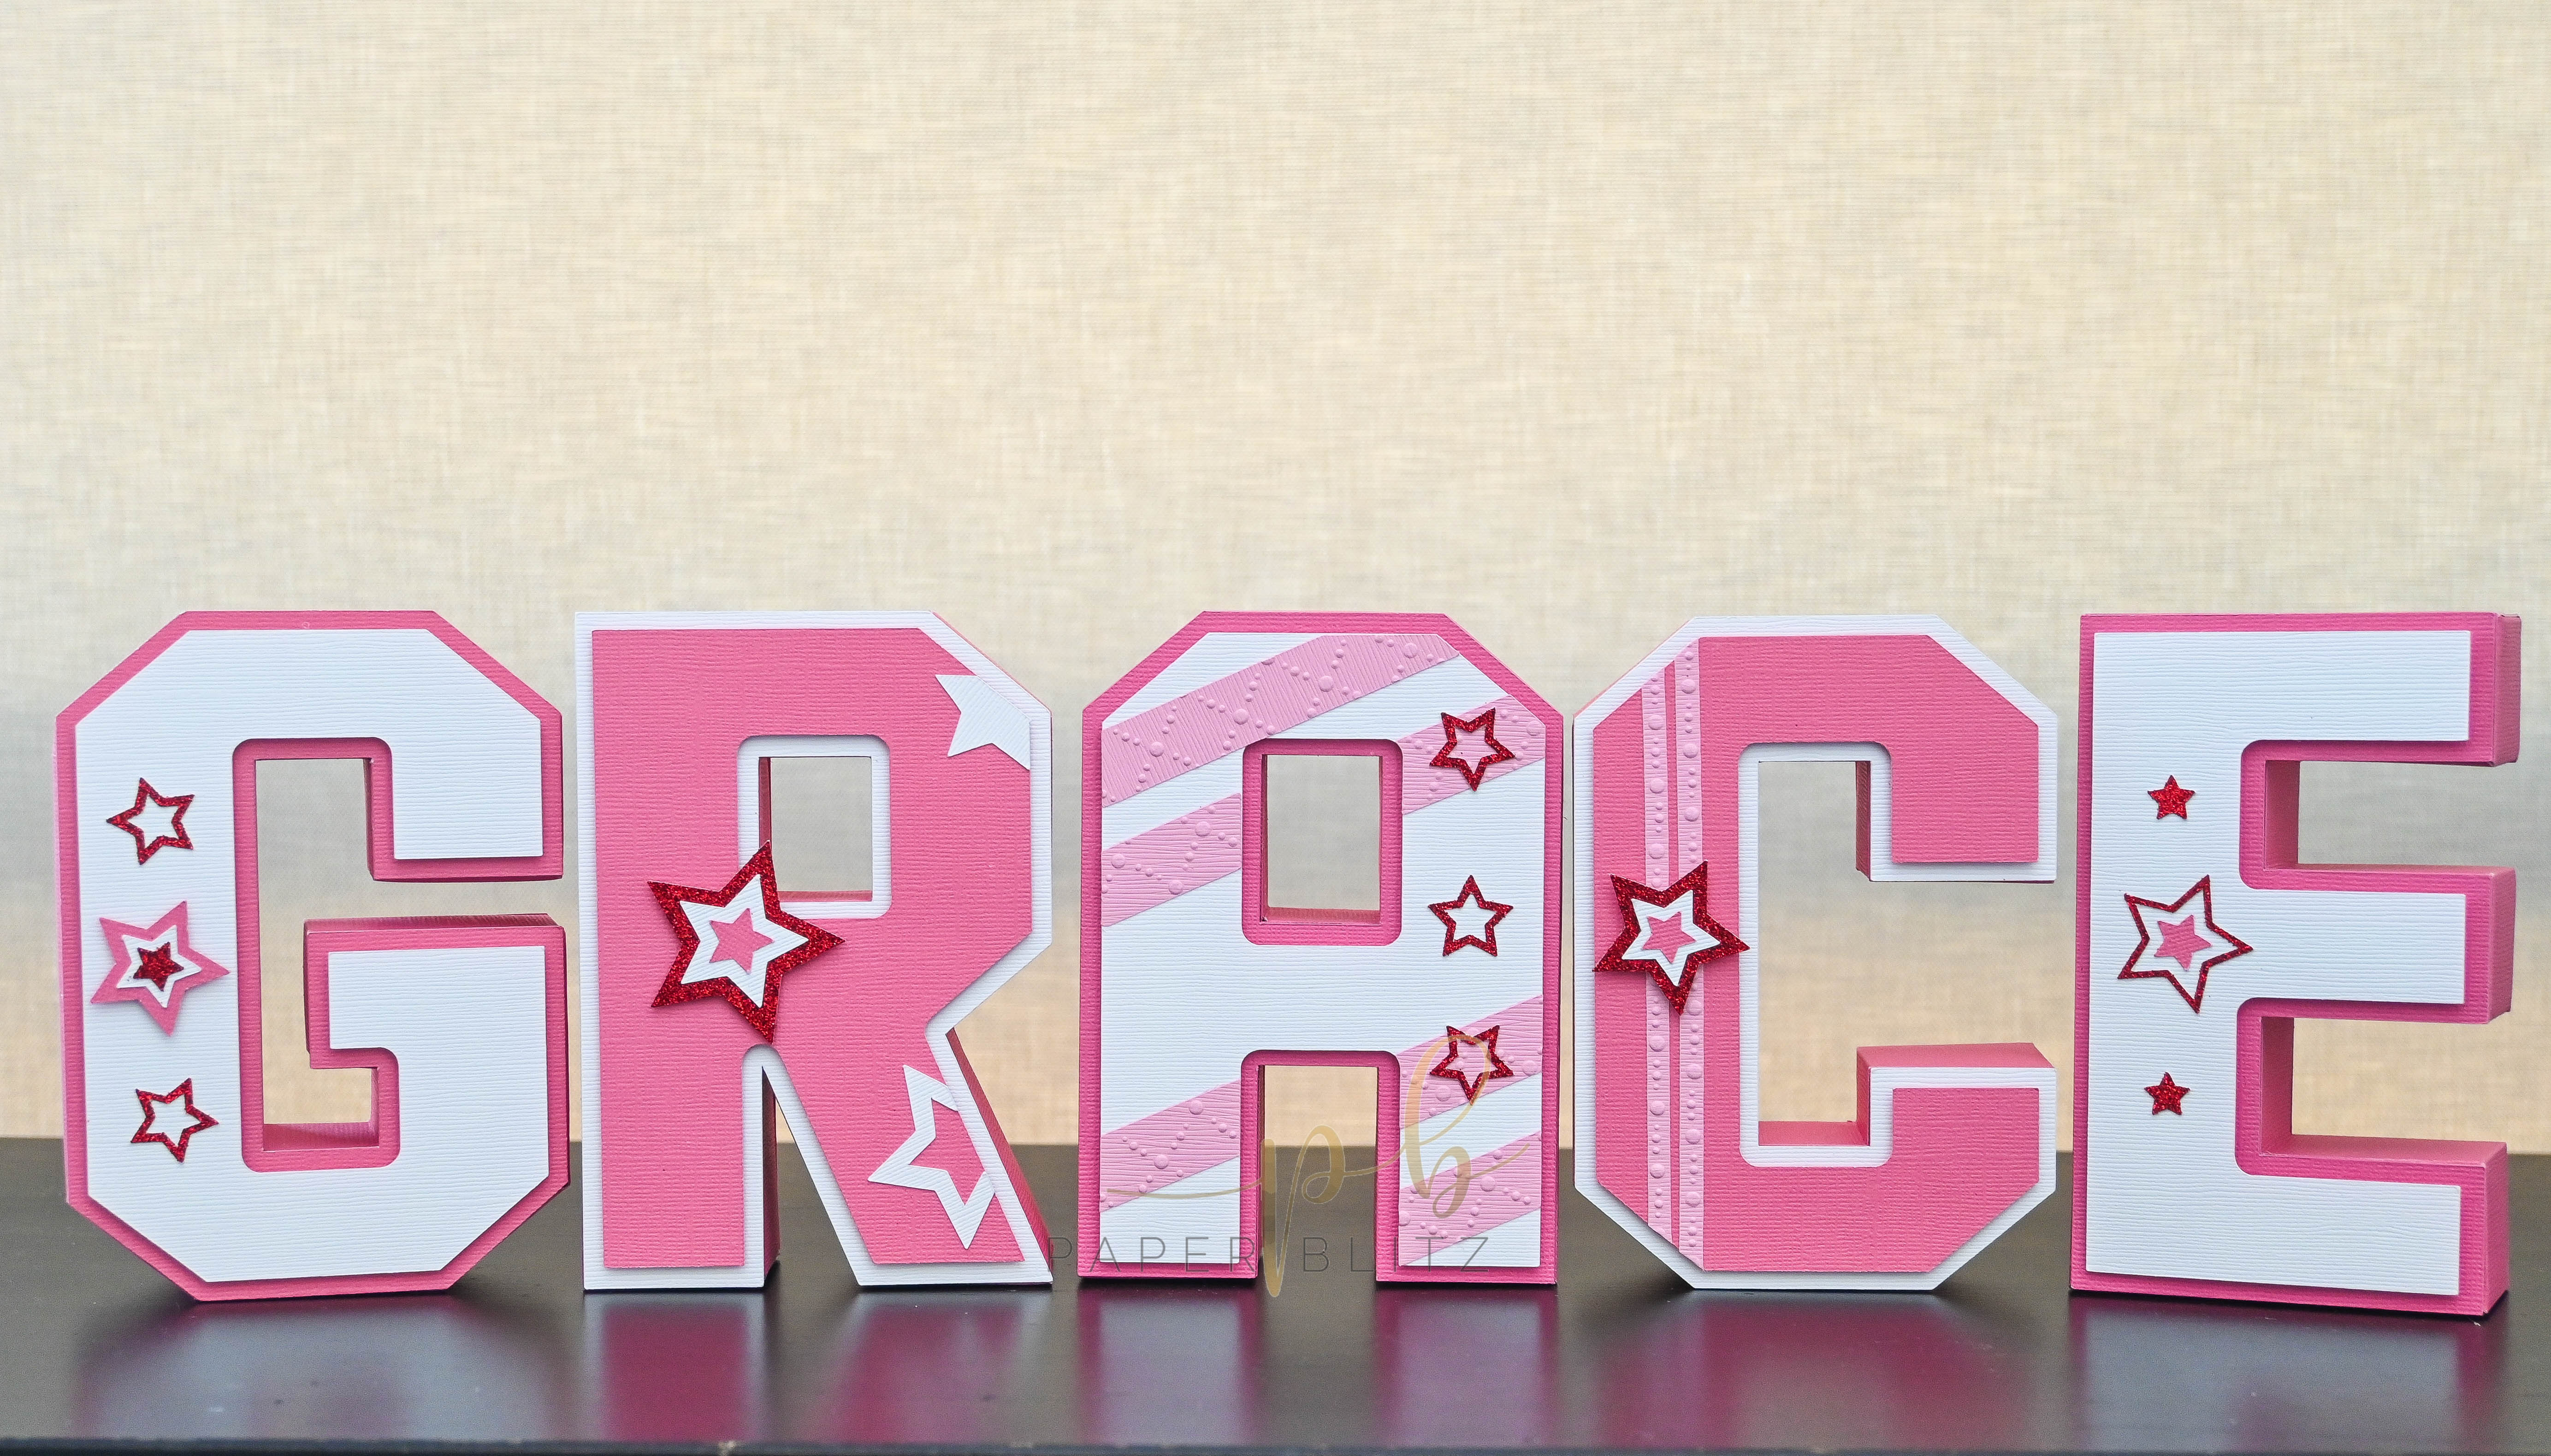 3d paper letters spelling the name 'GRACE'